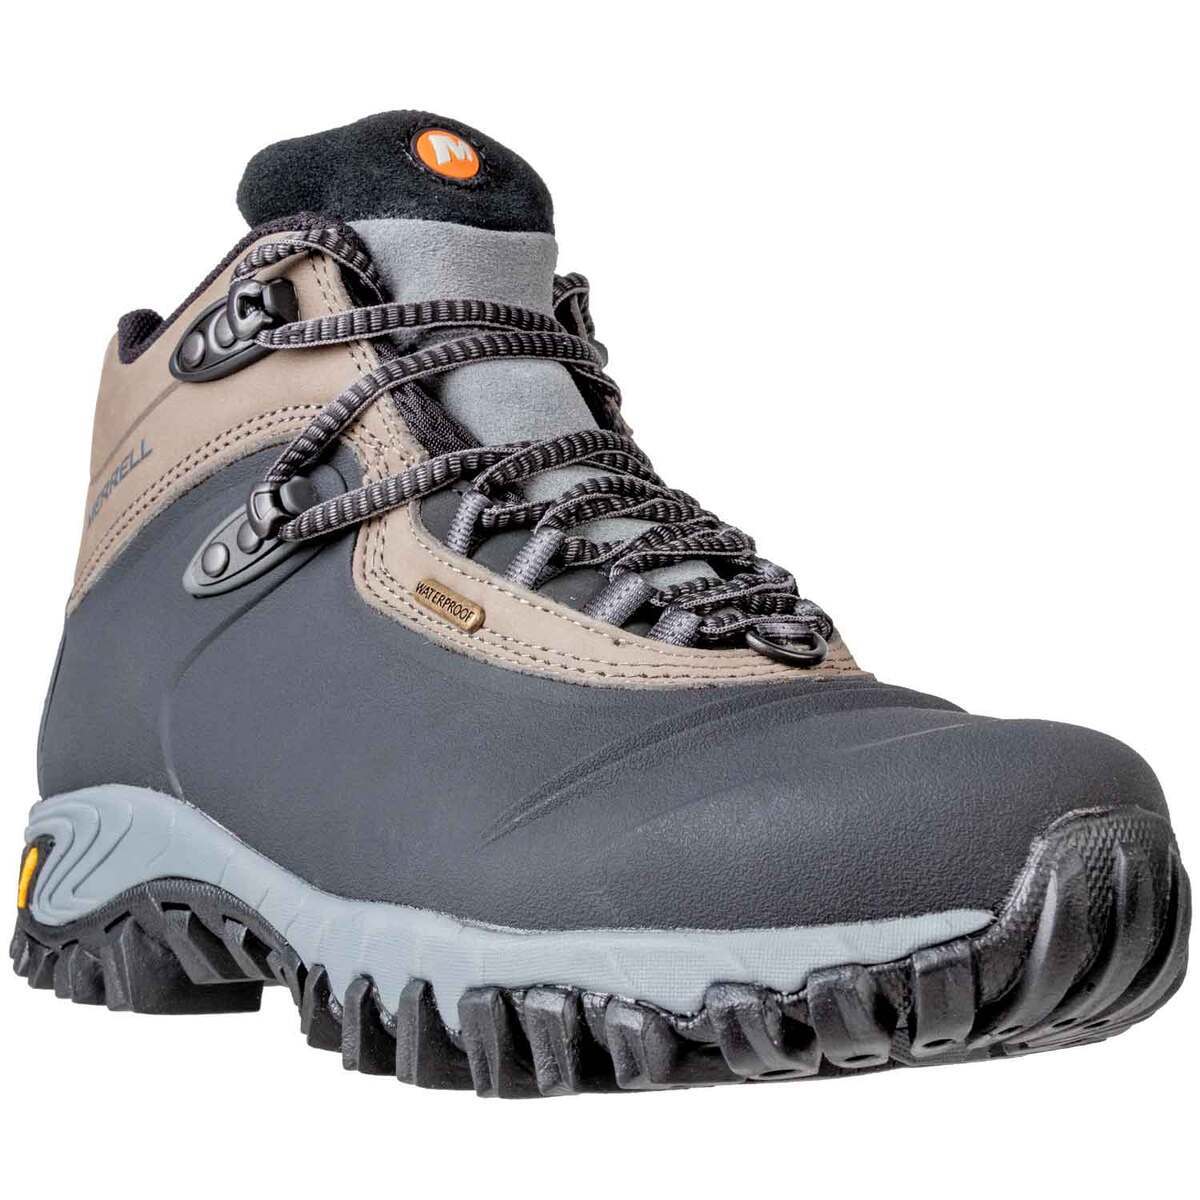 Merrell Men's Thermo 6 Waterproof Mid Hiking Boots Men's Size 11 Insulated